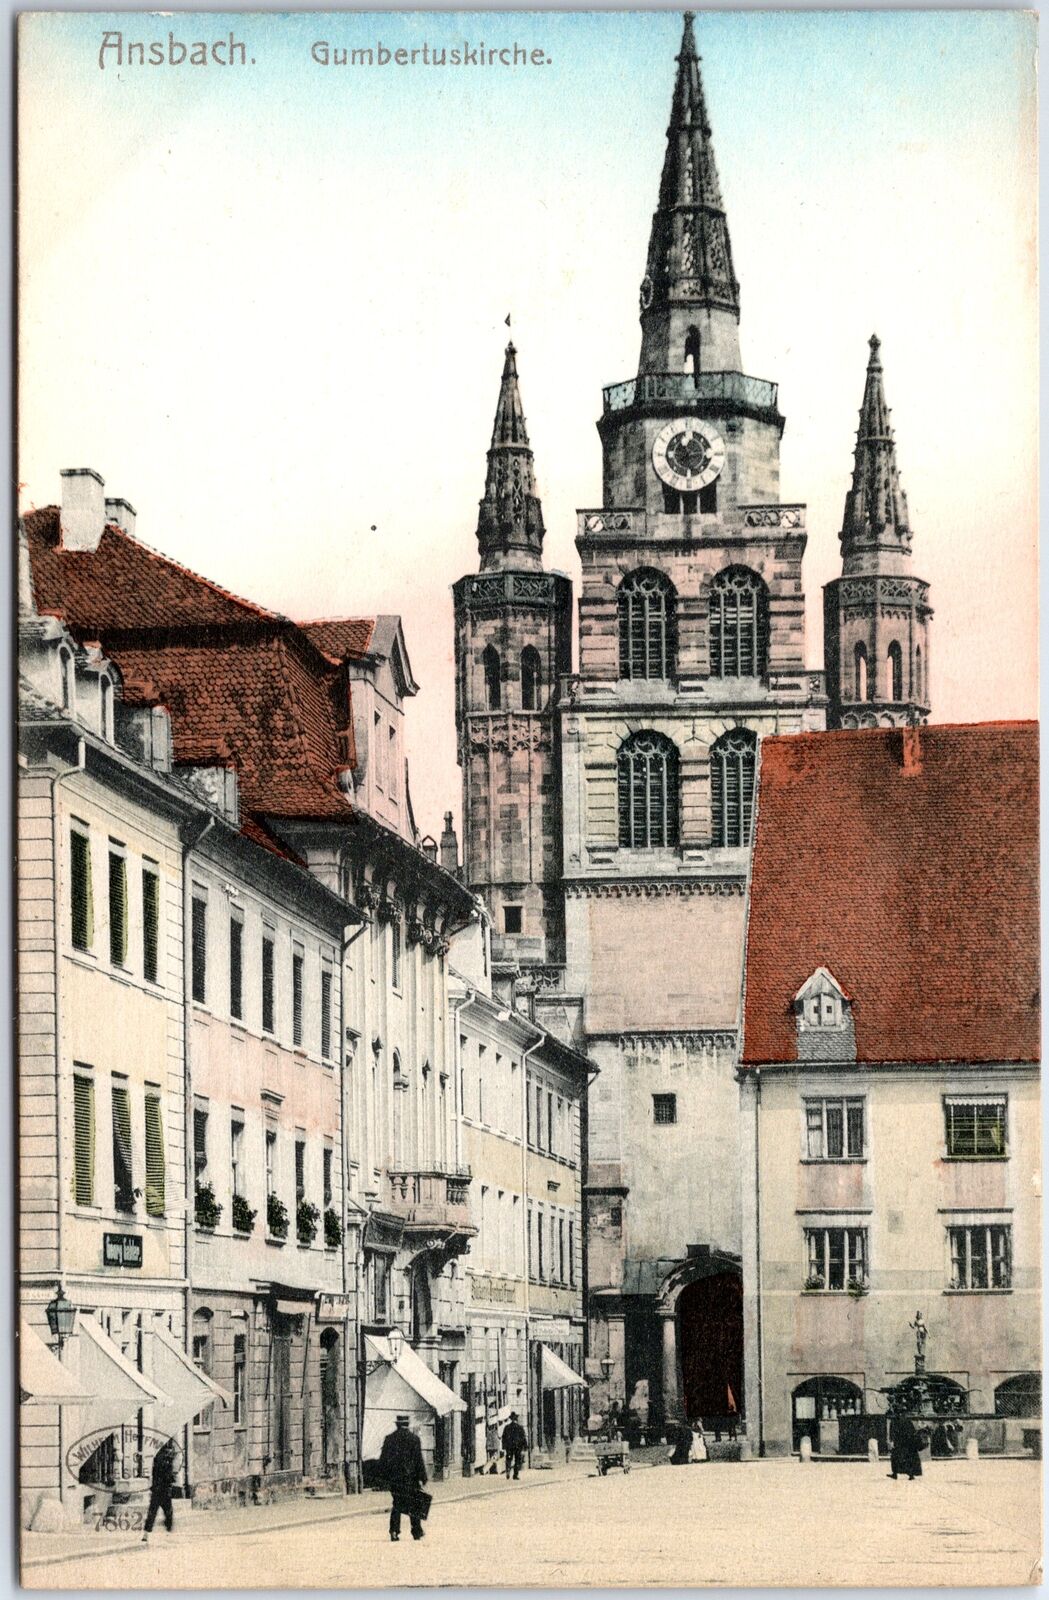 VINTAGE POSTCARD THE GUMBERLUS CHURCH AND COURTYARD AT ANSBACH GERMANY c. 1910